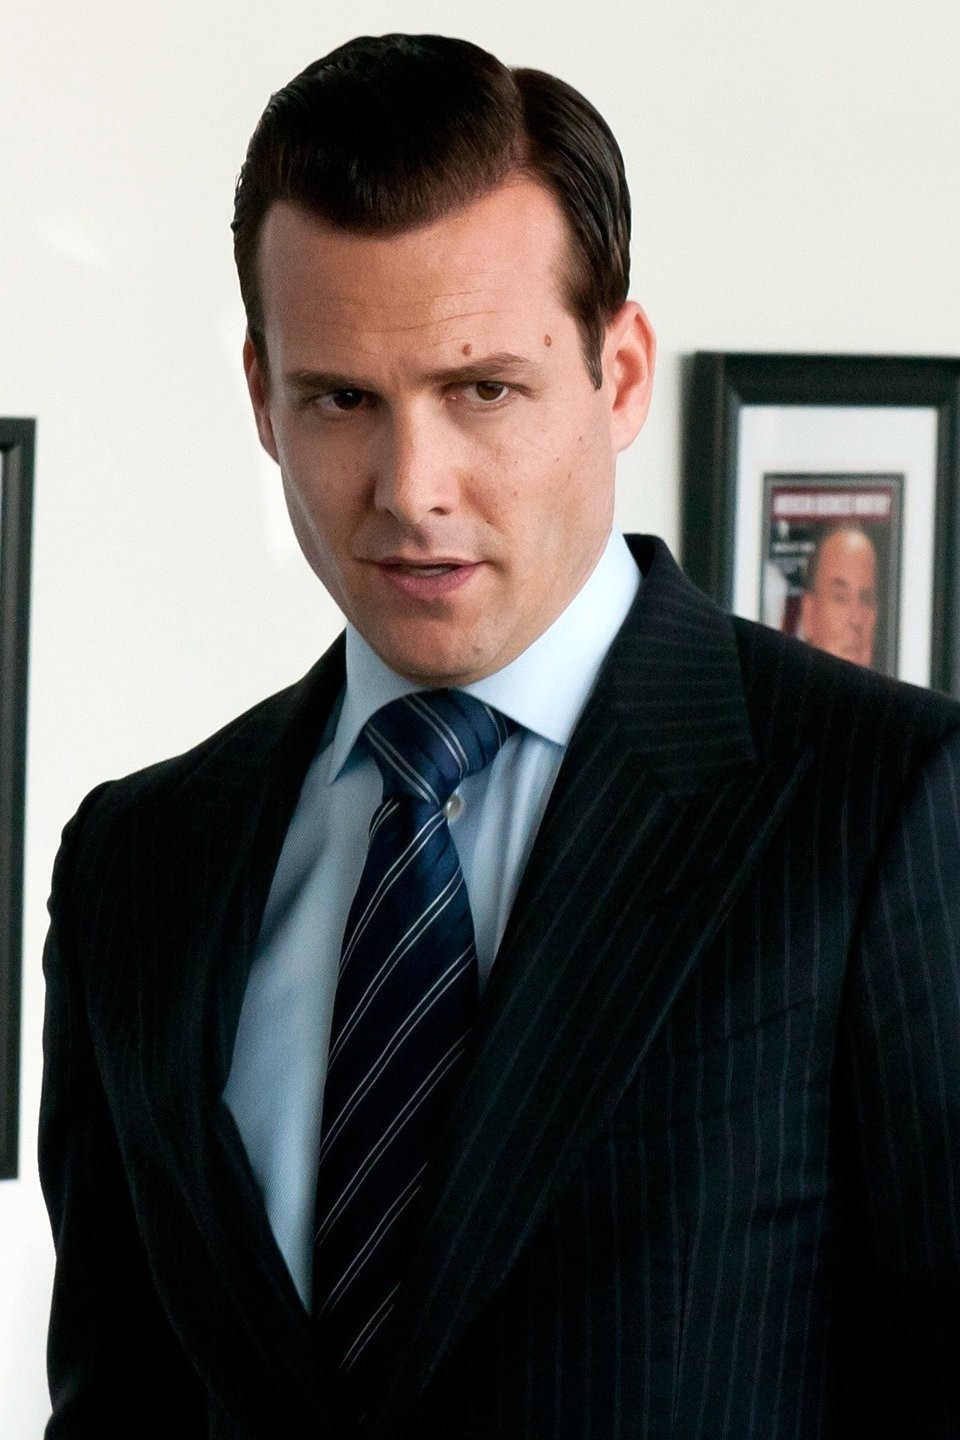 Harvey Specter Stands Up For Mike  Suits  YouTube